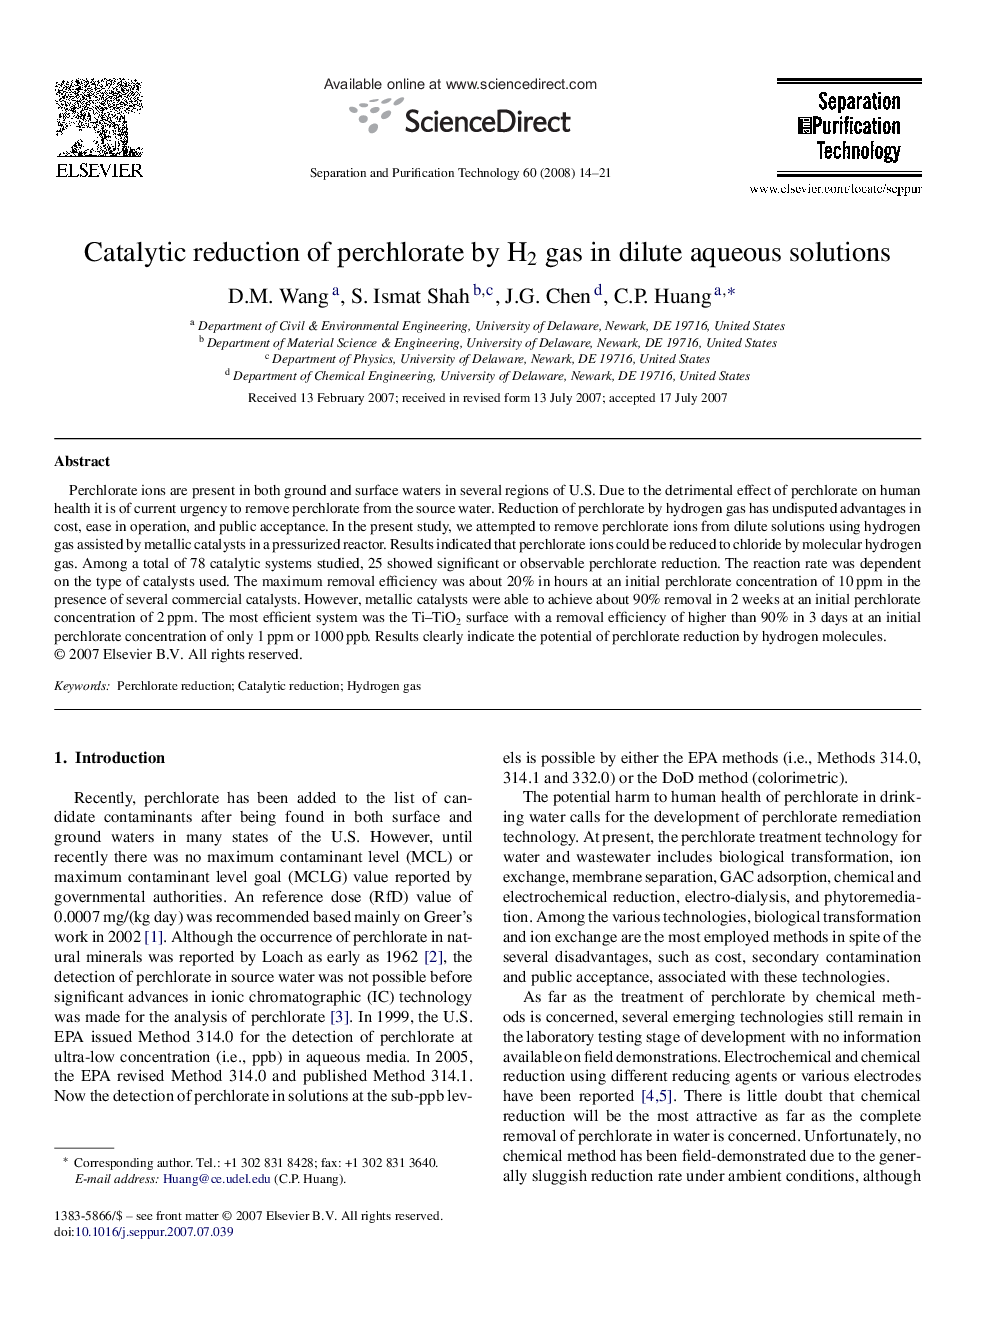 Catalytic reduction of perchlorate by H2 gas in dilute aqueous solutions